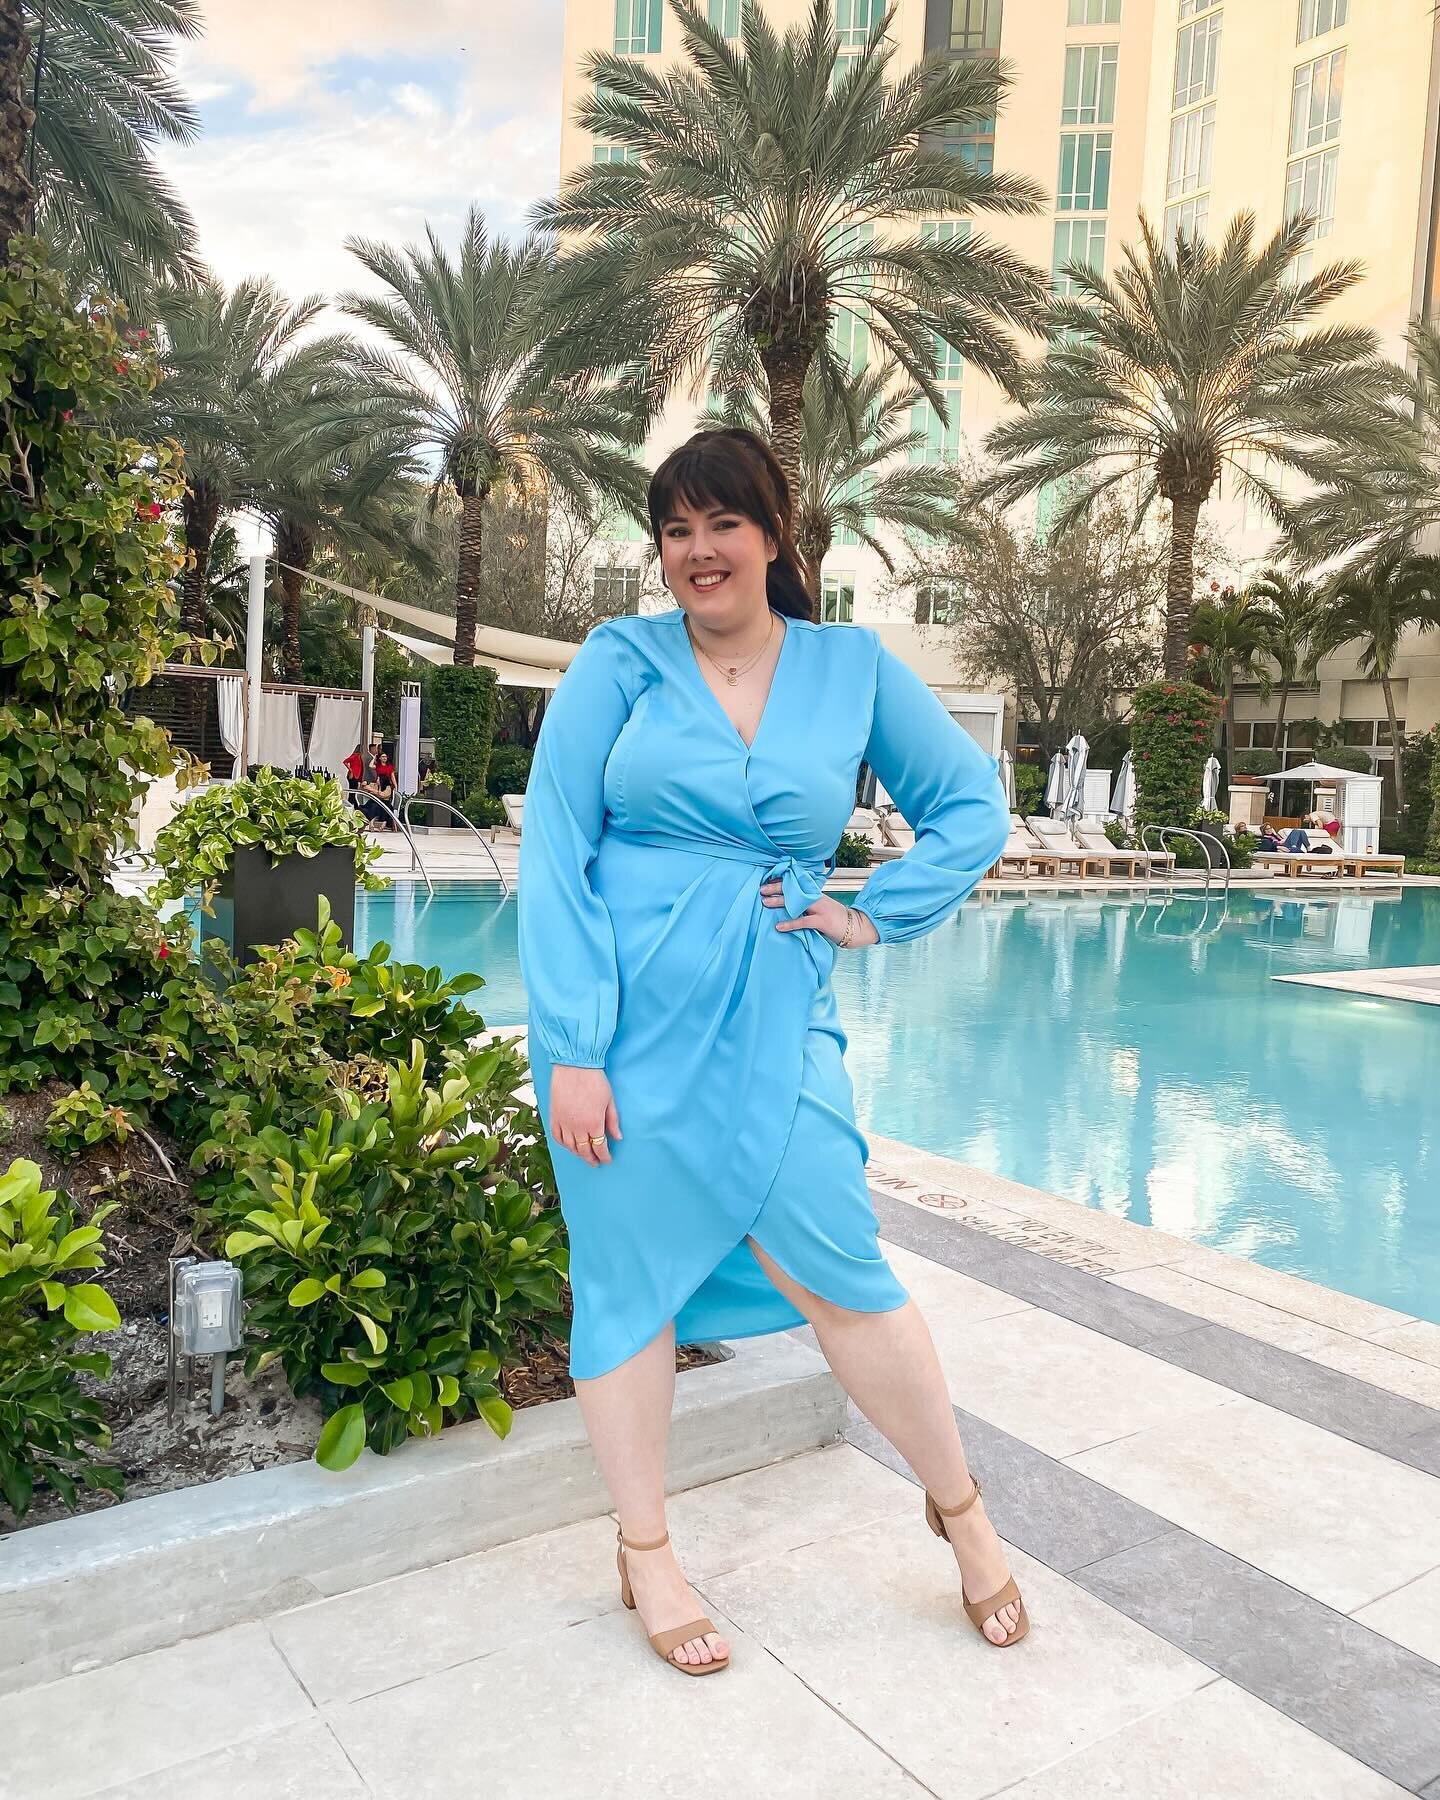 🌴 Palm Trees &amp; Blue Skies 🩵

A quick work trip this week to Florida, also doubled as a nice change from the Winnipeg cold. 🥶 

#winnipegblogger #lifestyleblogger #styleblogger